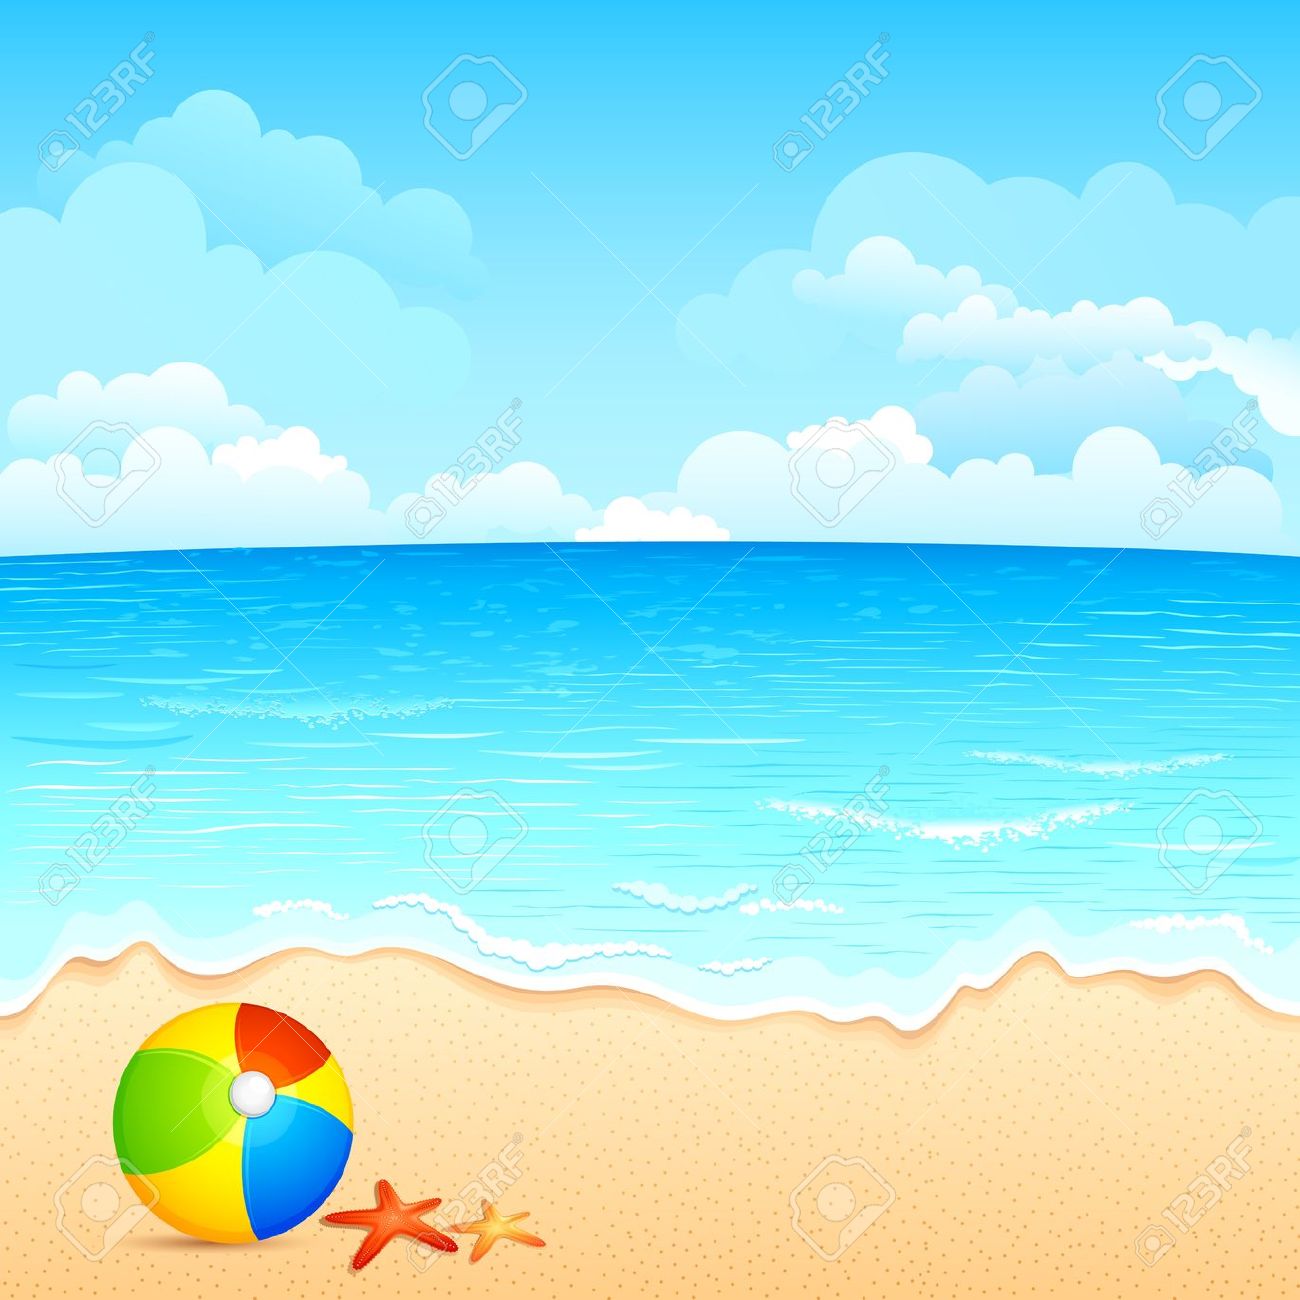 Beach clipart free clipart images